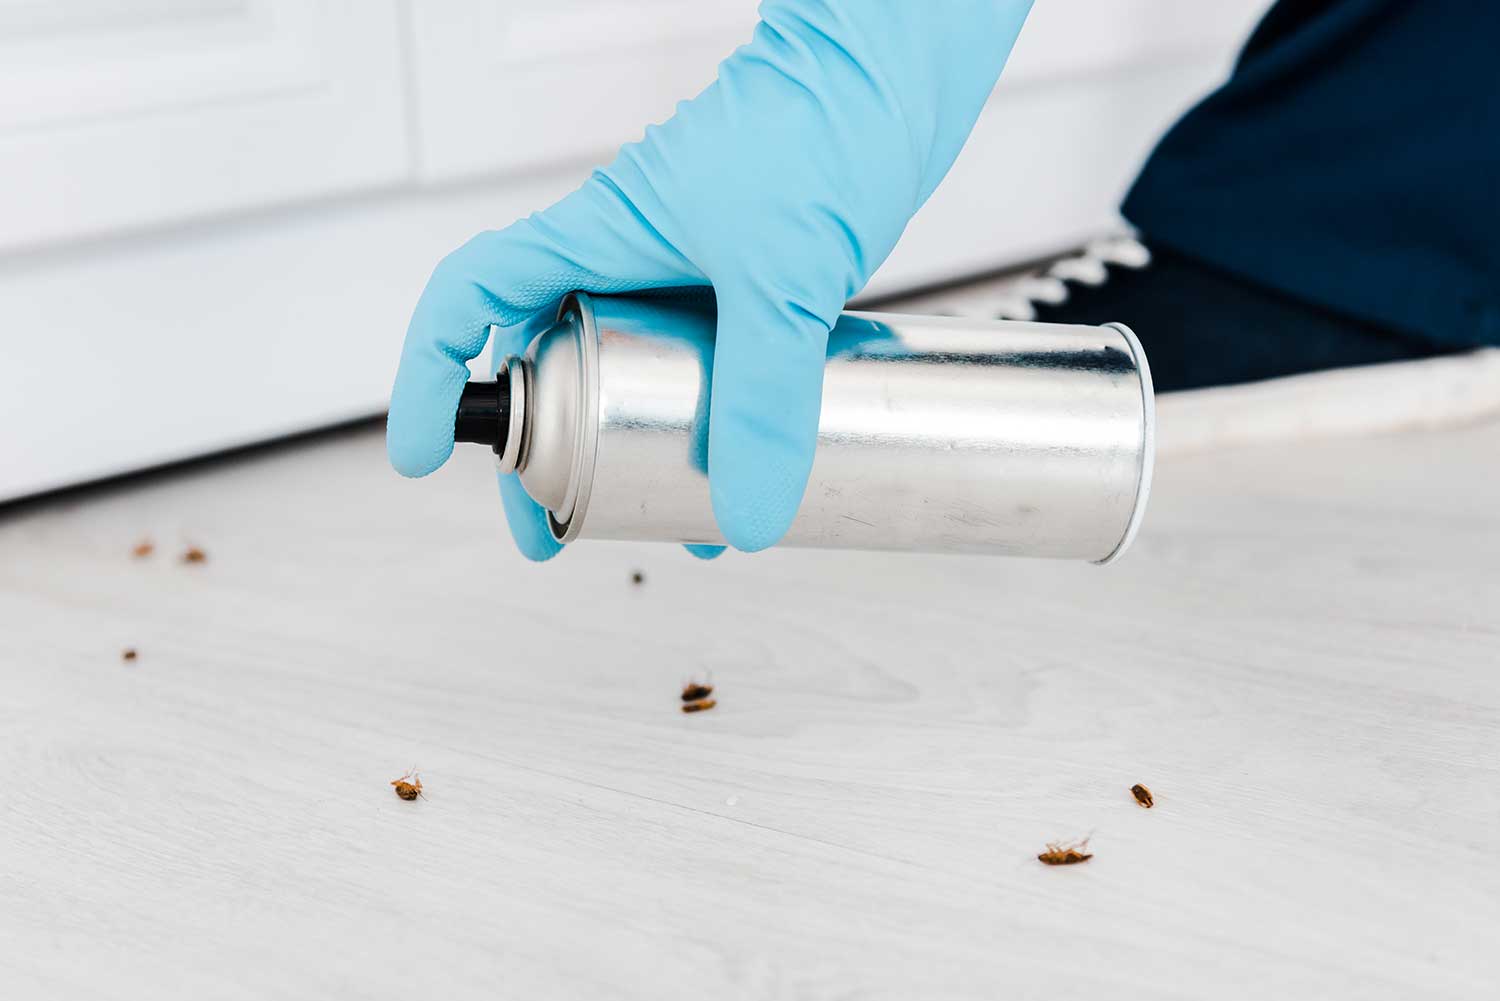 Cropped view of exterminator holding toxic spray can near insects on floor